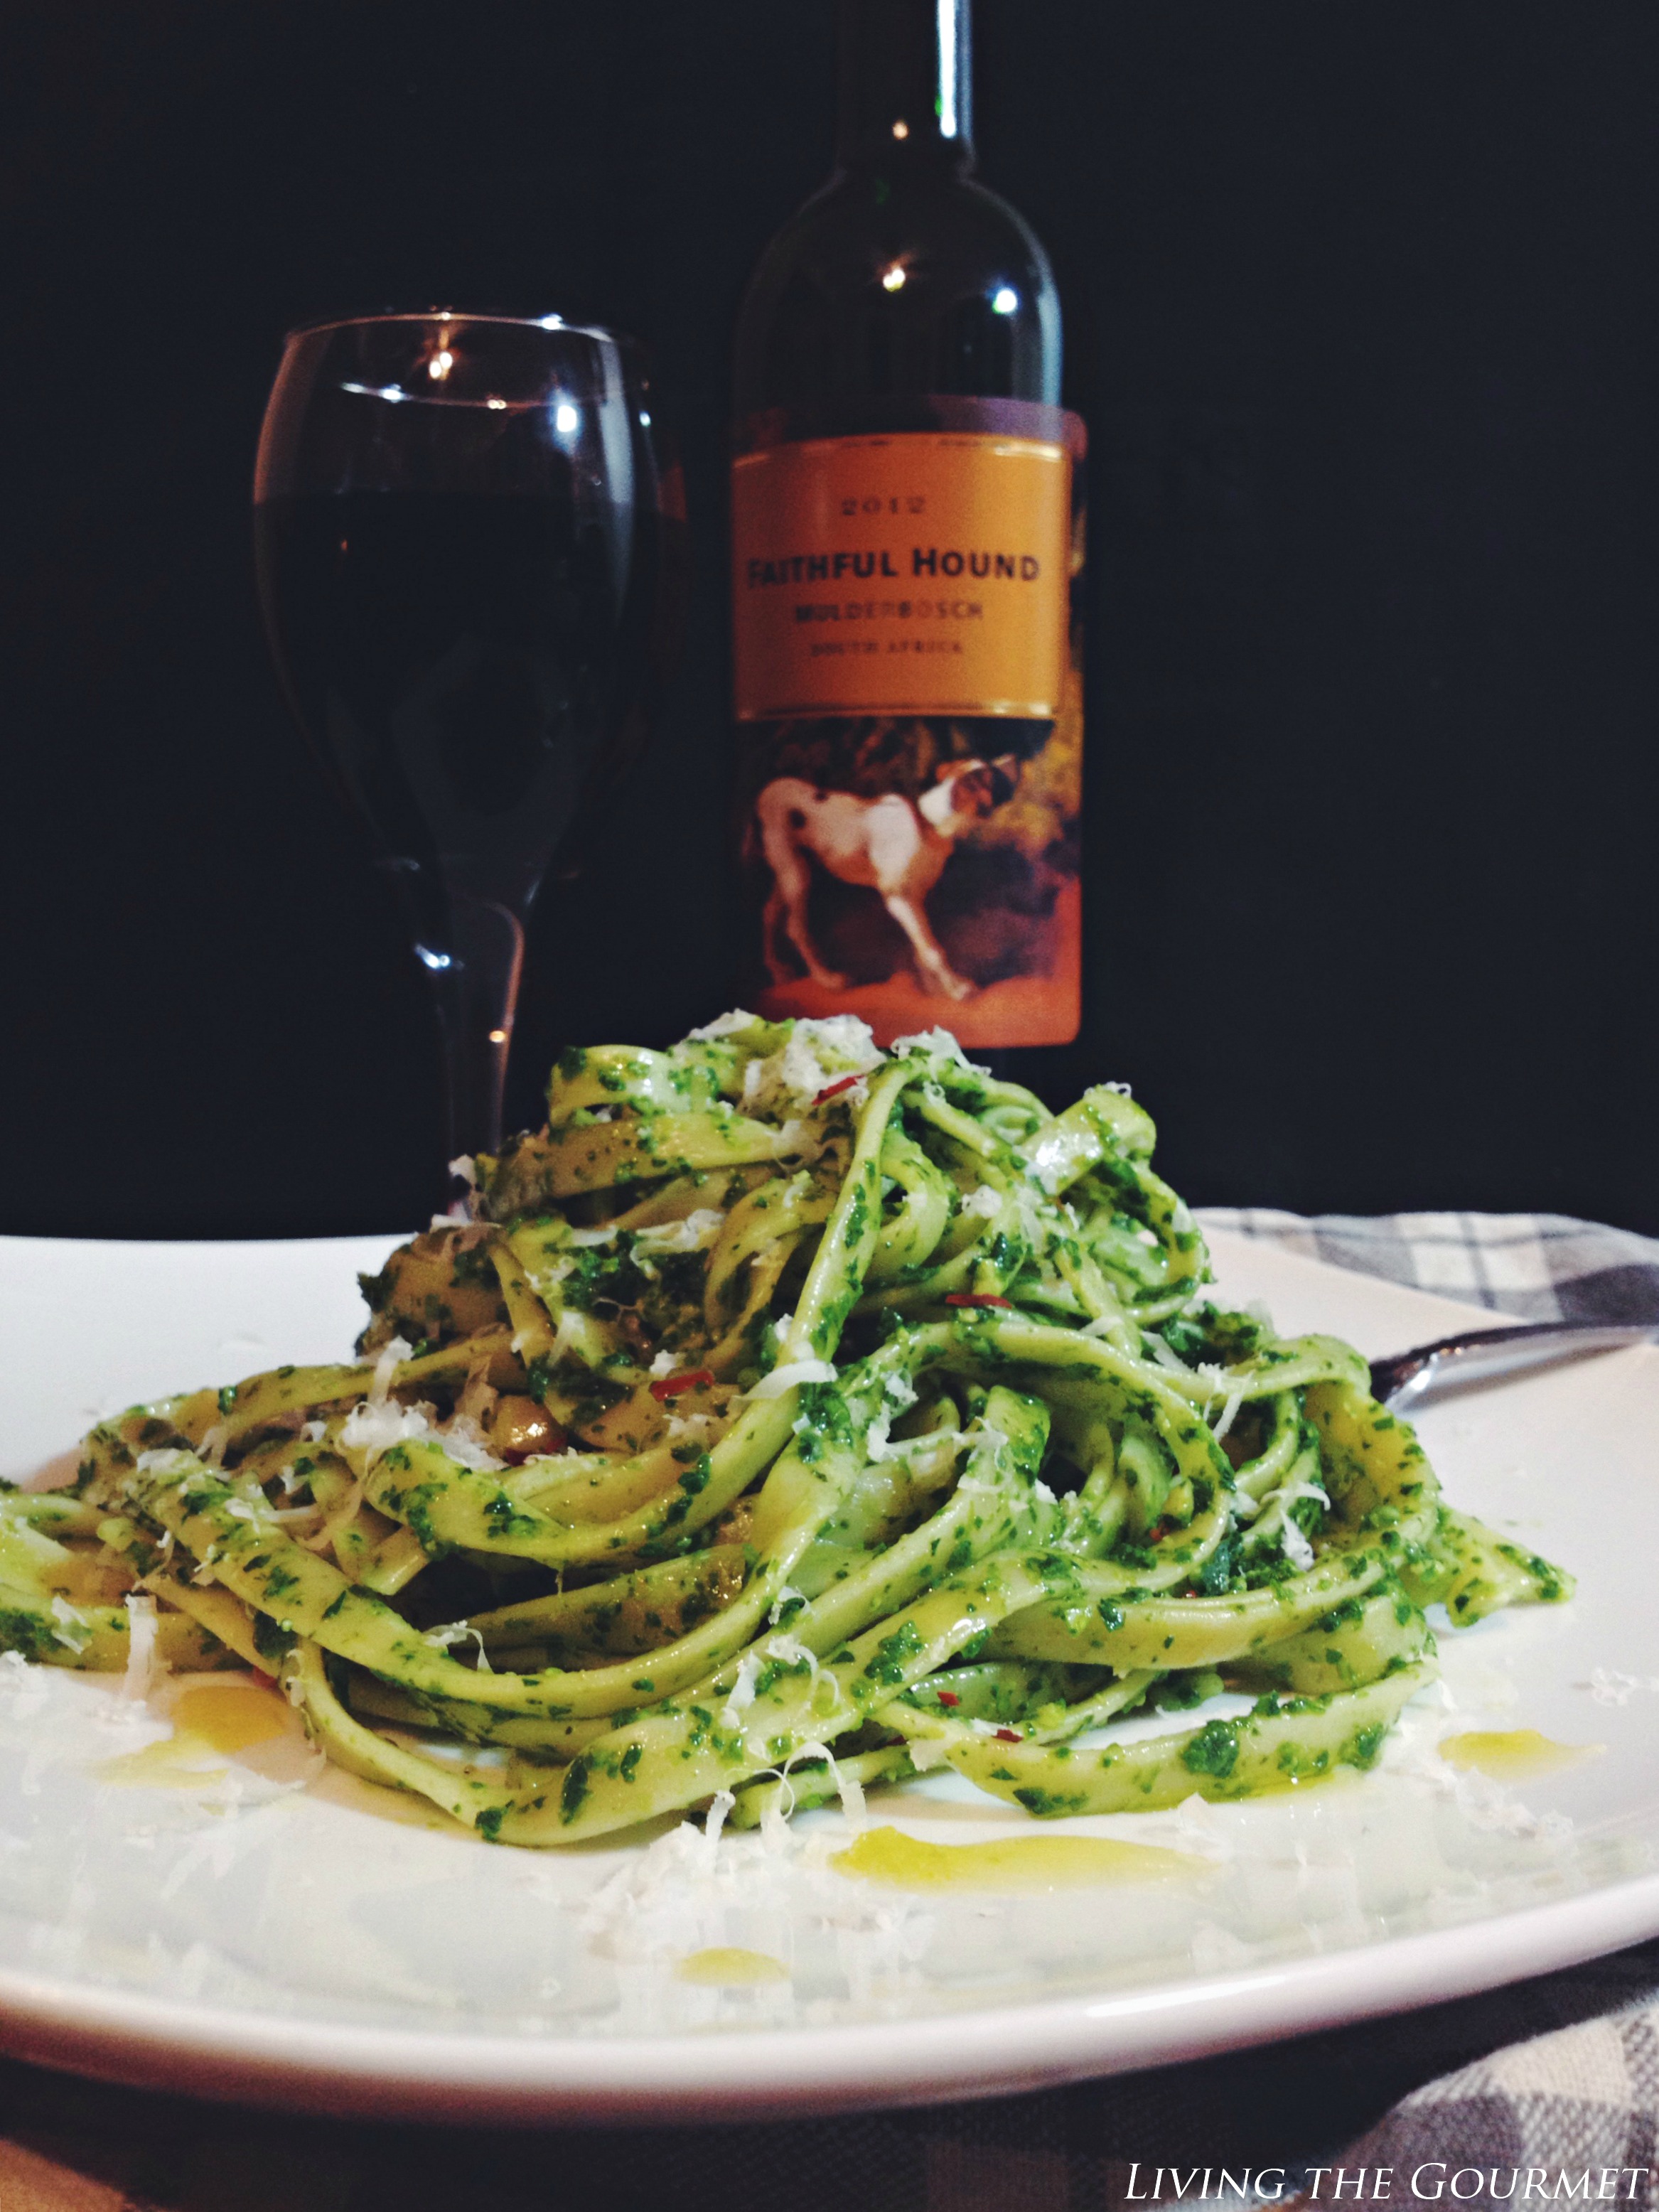 Living the Gourmet: Arugula, Anchovies & Spinach Pesto with Fettuccine